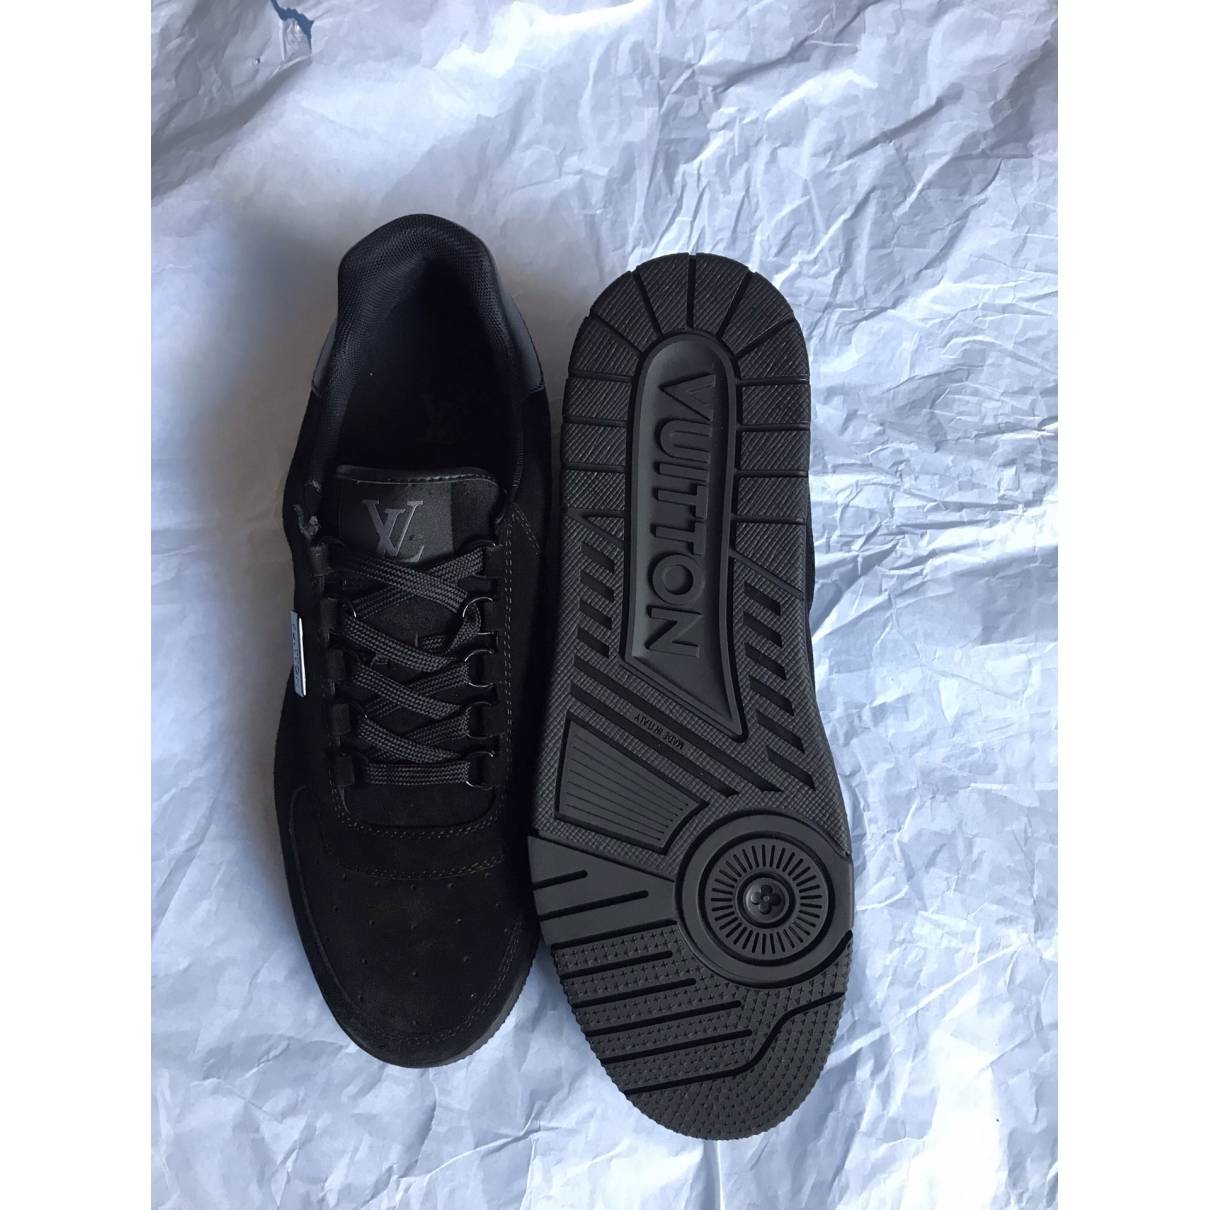 Lv trainer low trainers Louis Vuitton Black size 9 UK in Suede